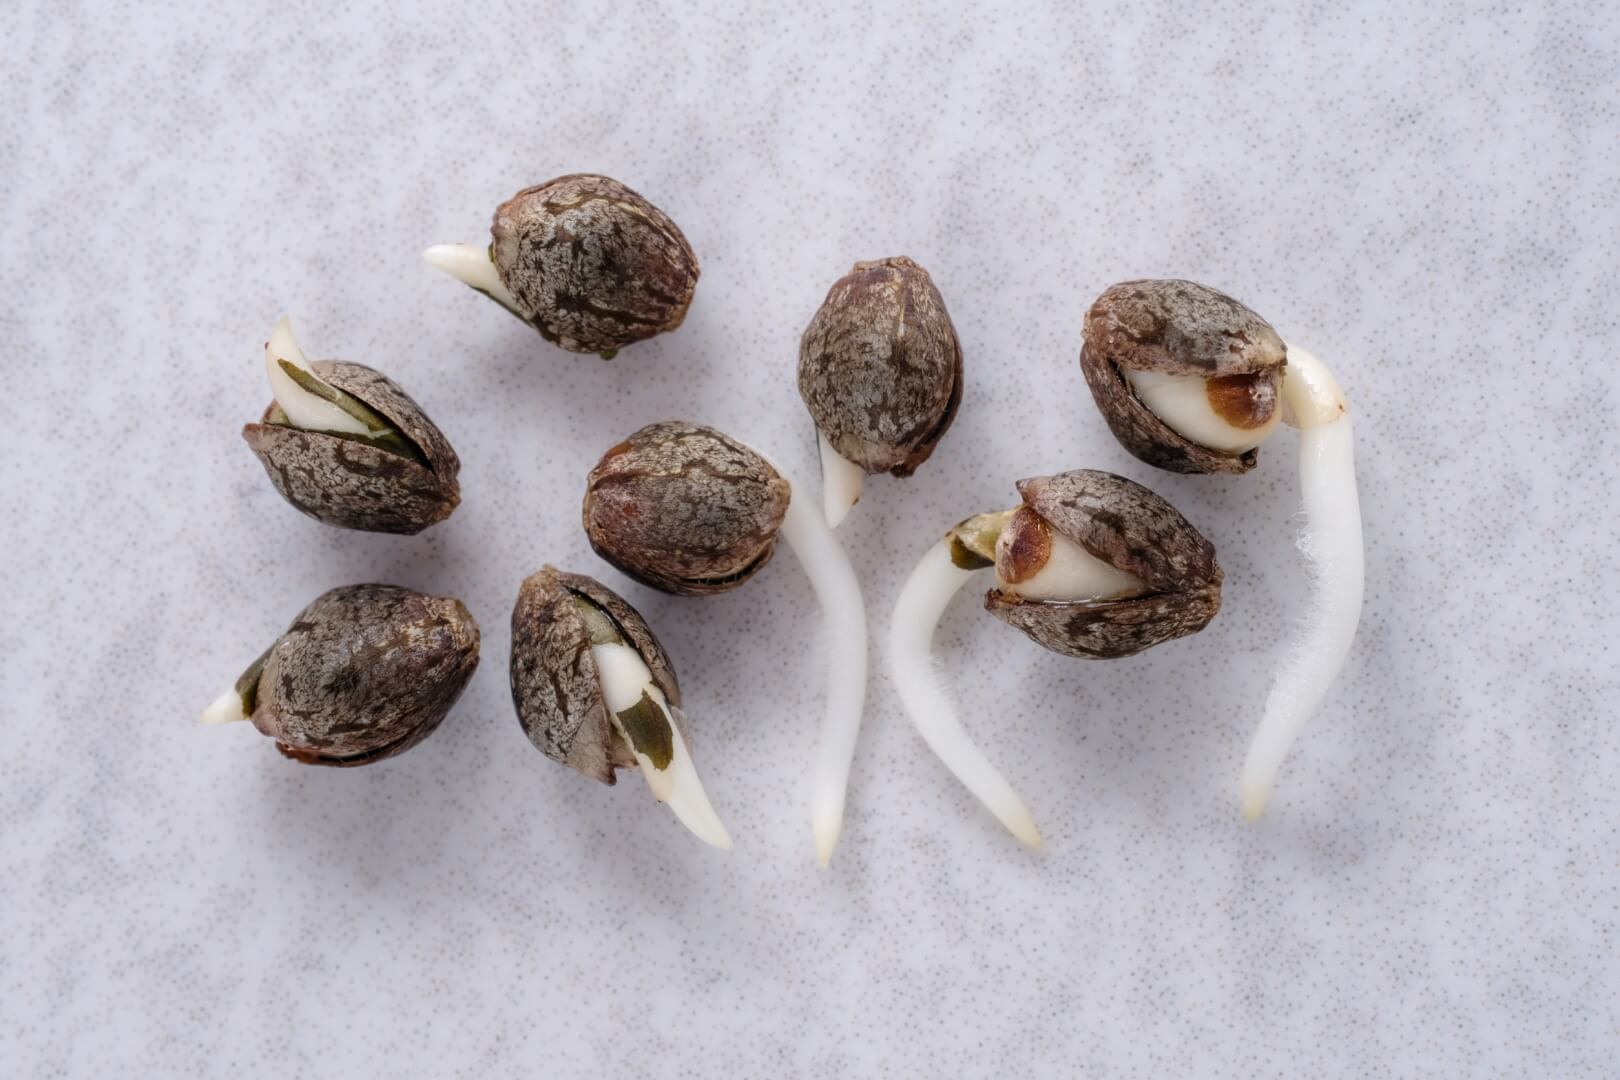 How long do cannabis seeds last with proper care?